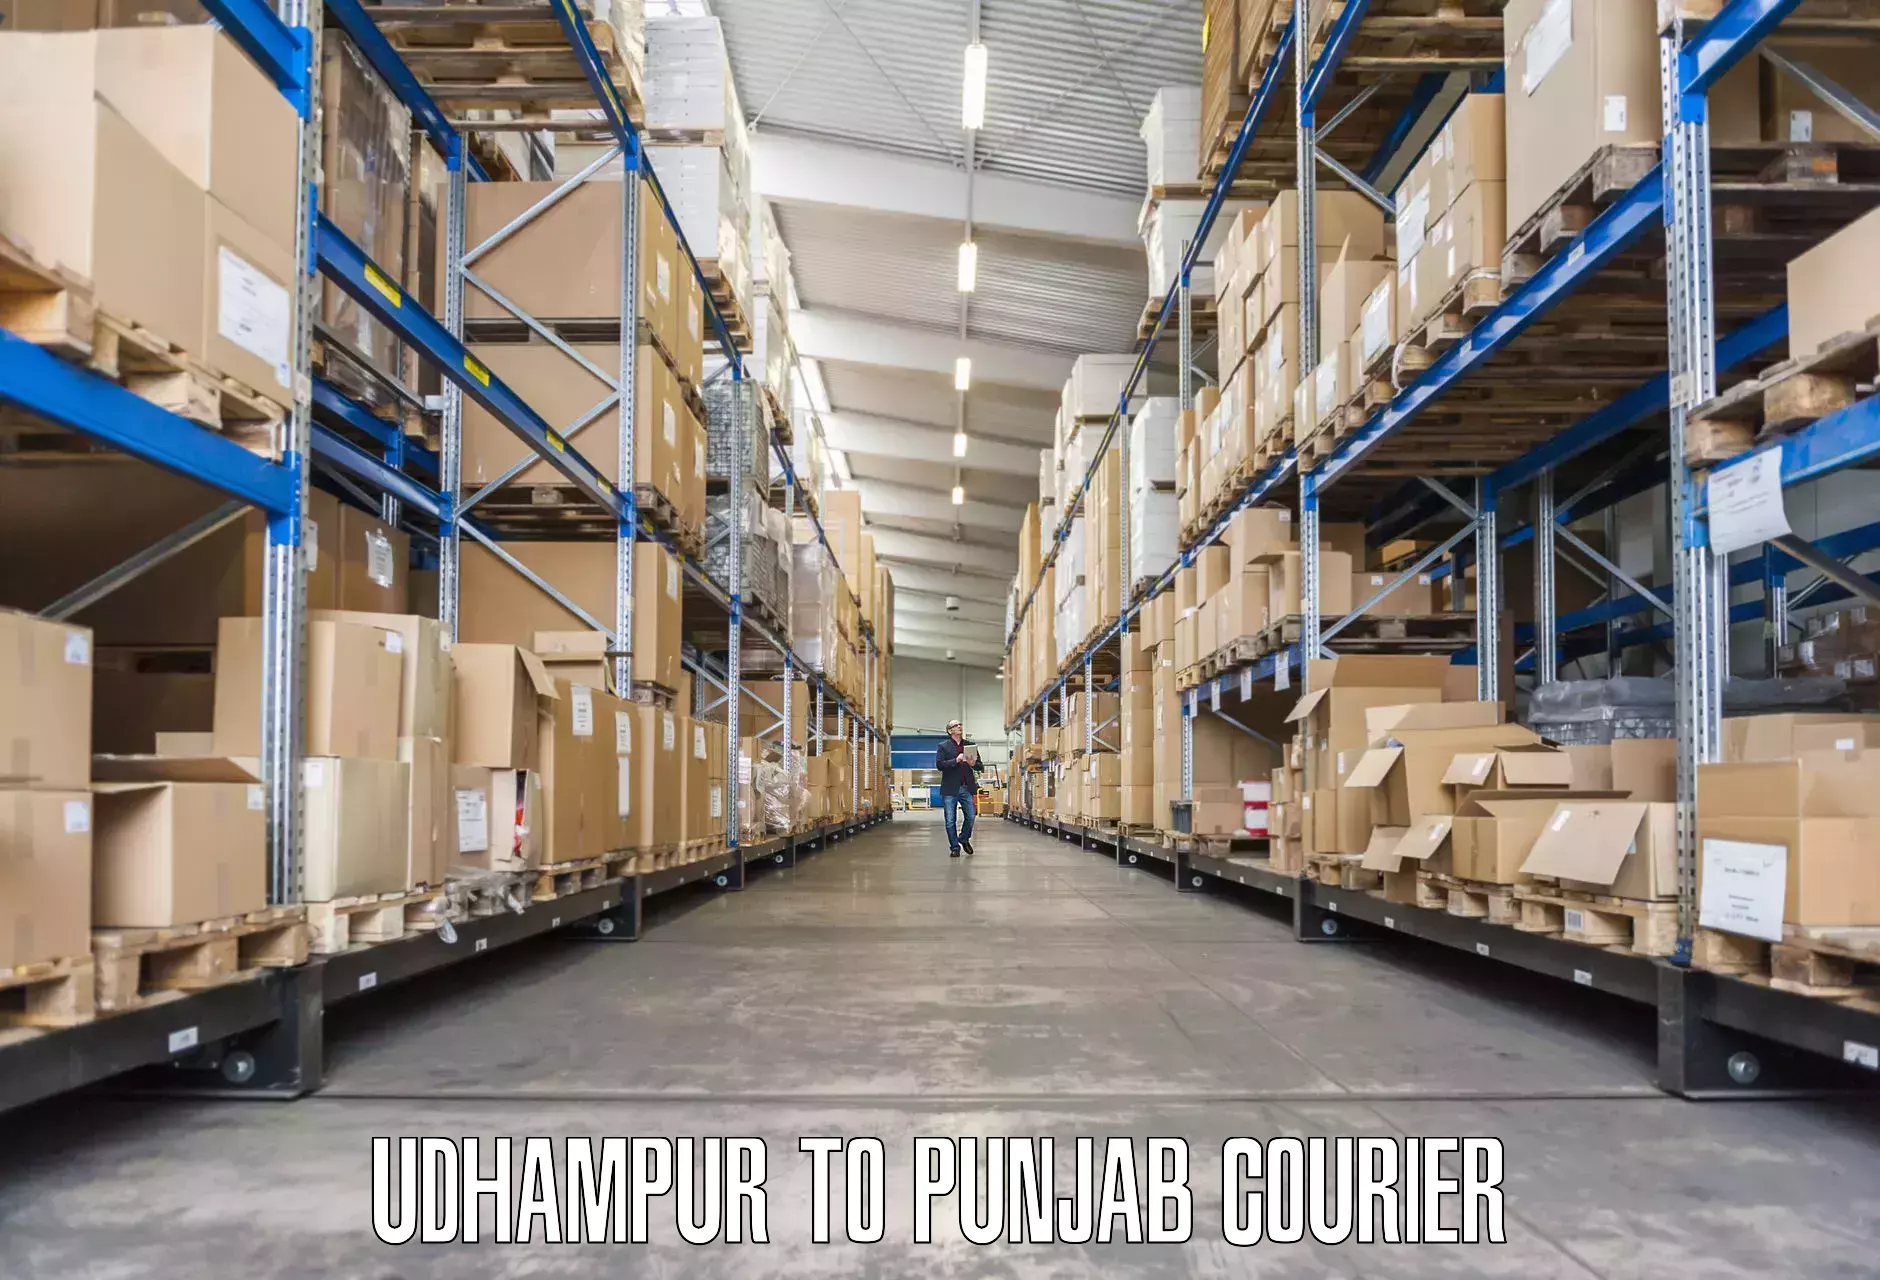 Moving and packing experts Udhampur to Punjab